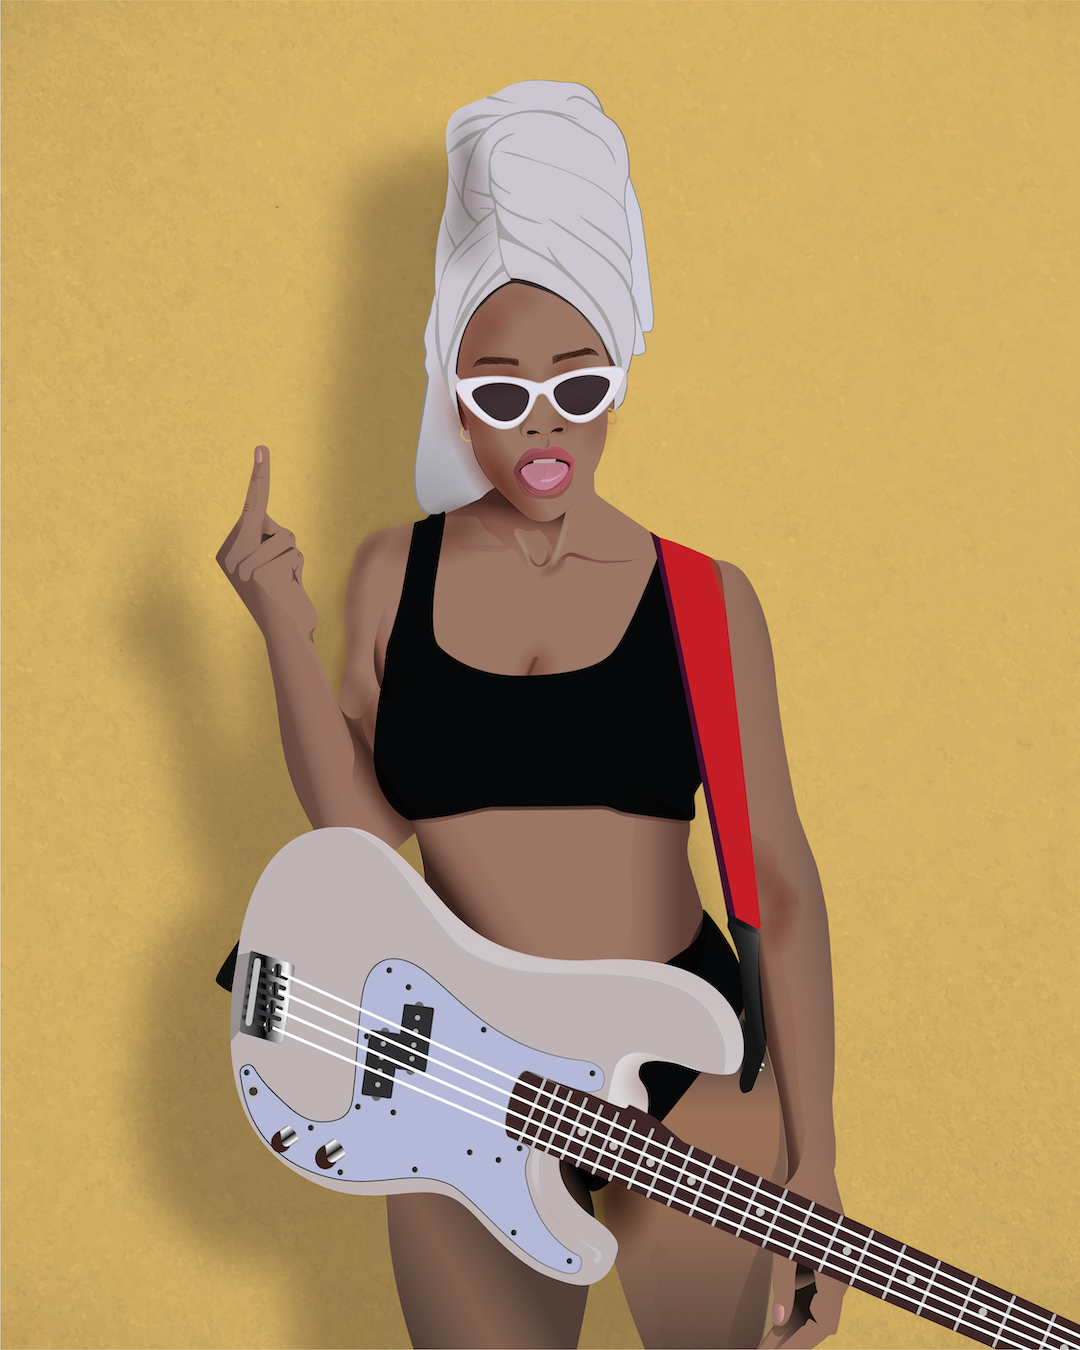 She is the amazing bassist April Kae…the future of bass.